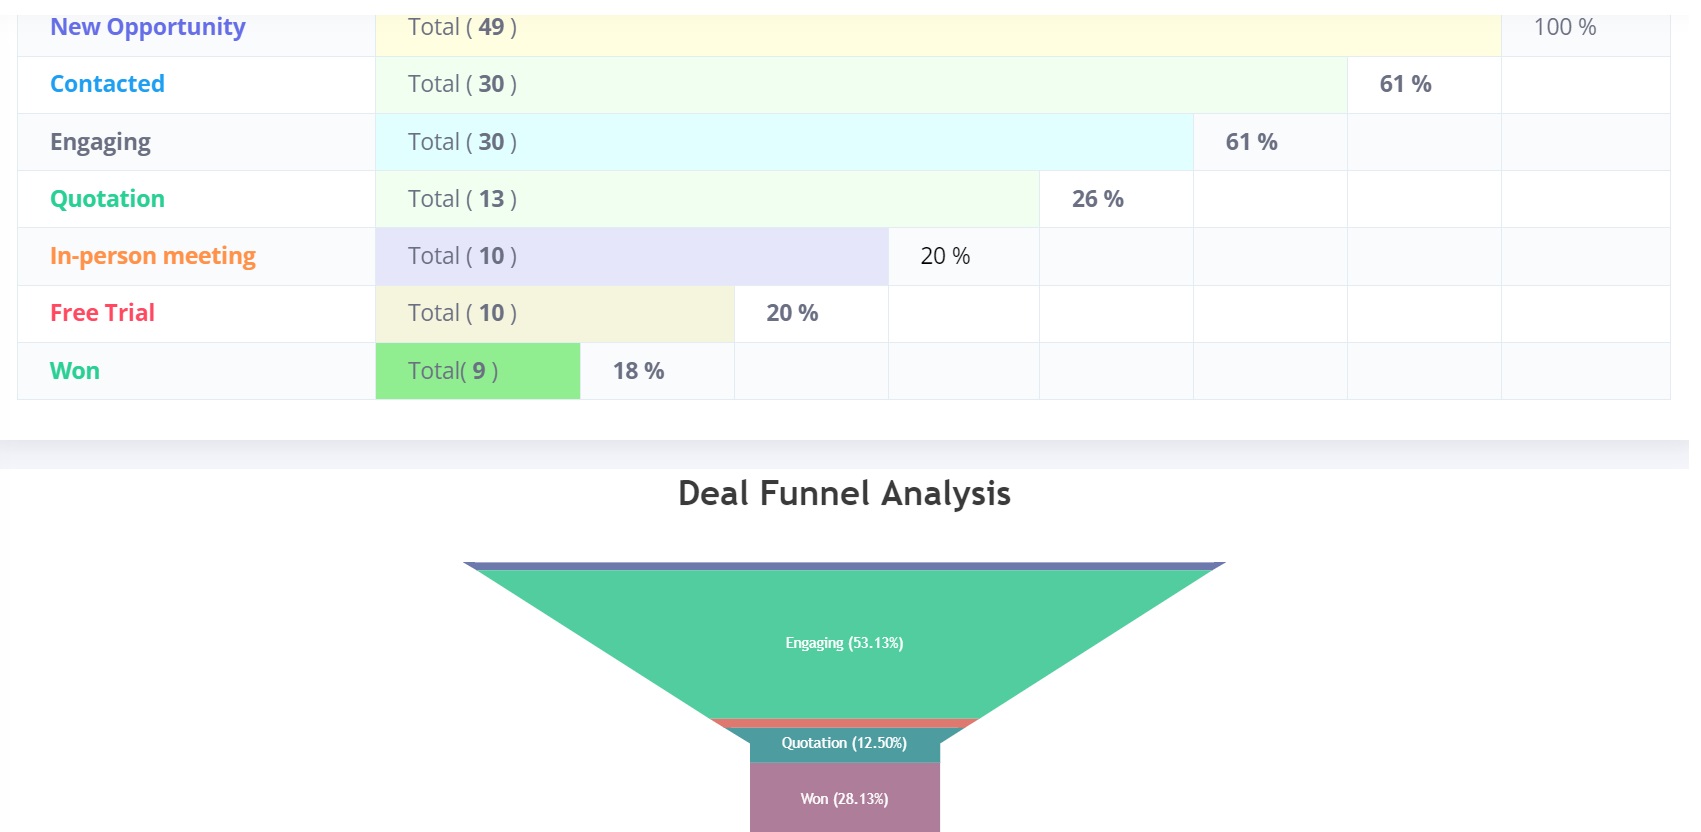 Deal Funnel Analysis